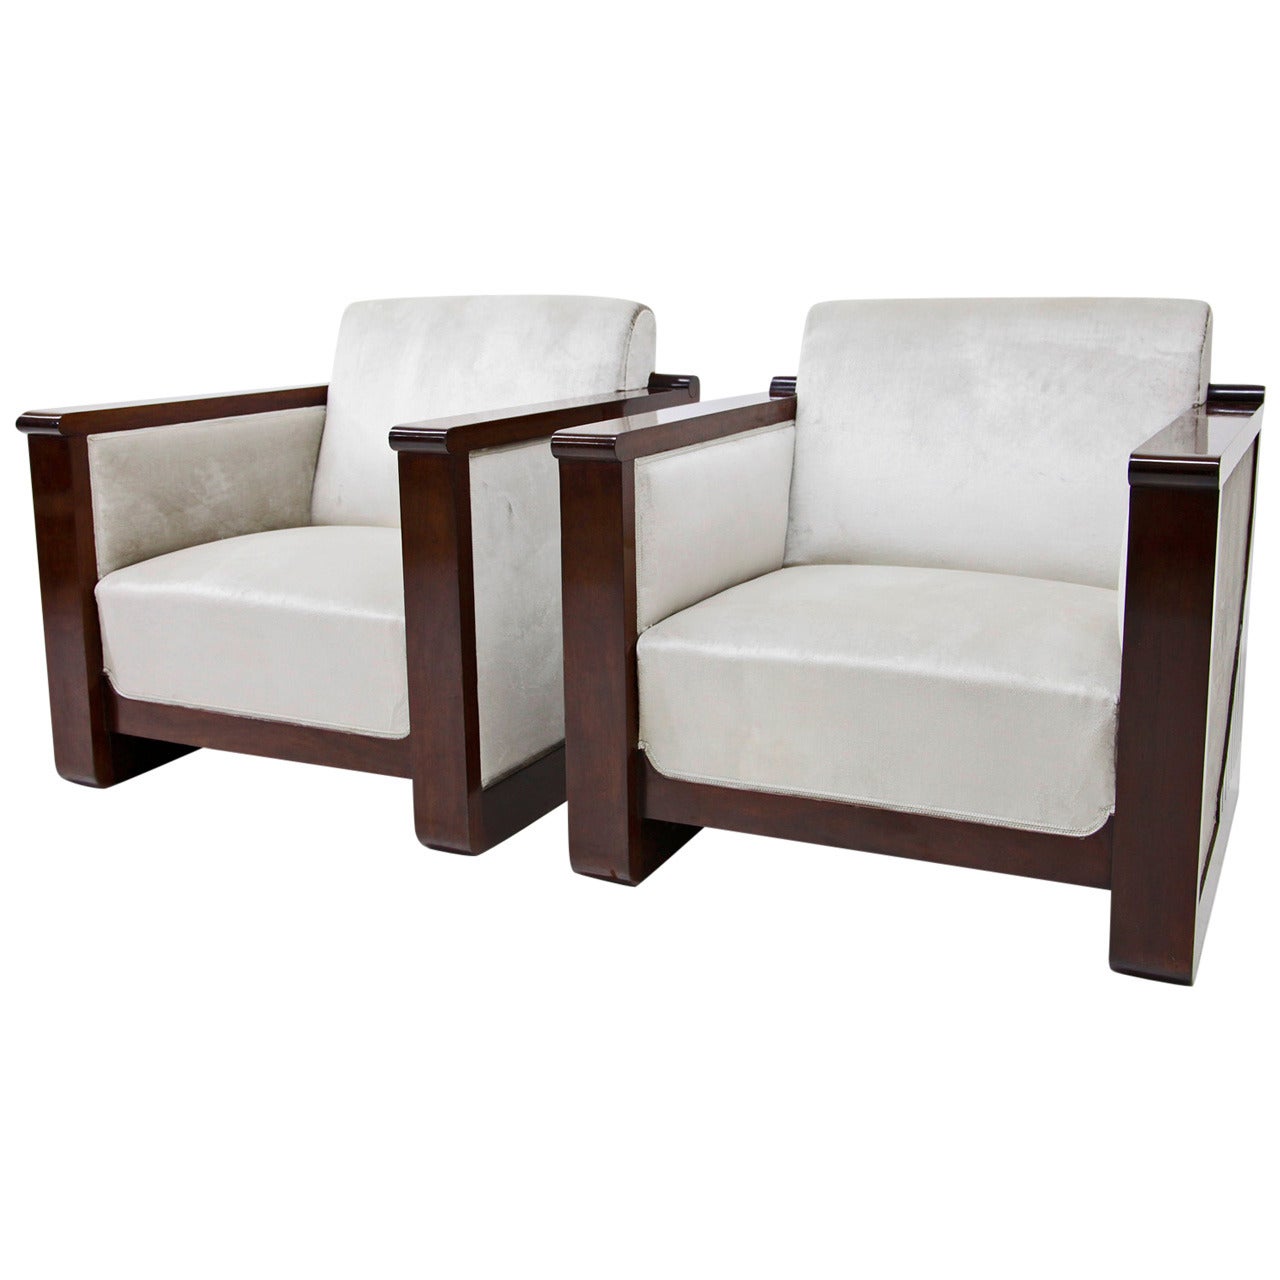 Pair of French Art Deco Armchairs with Grey Fabric, circa 1920s For Sale